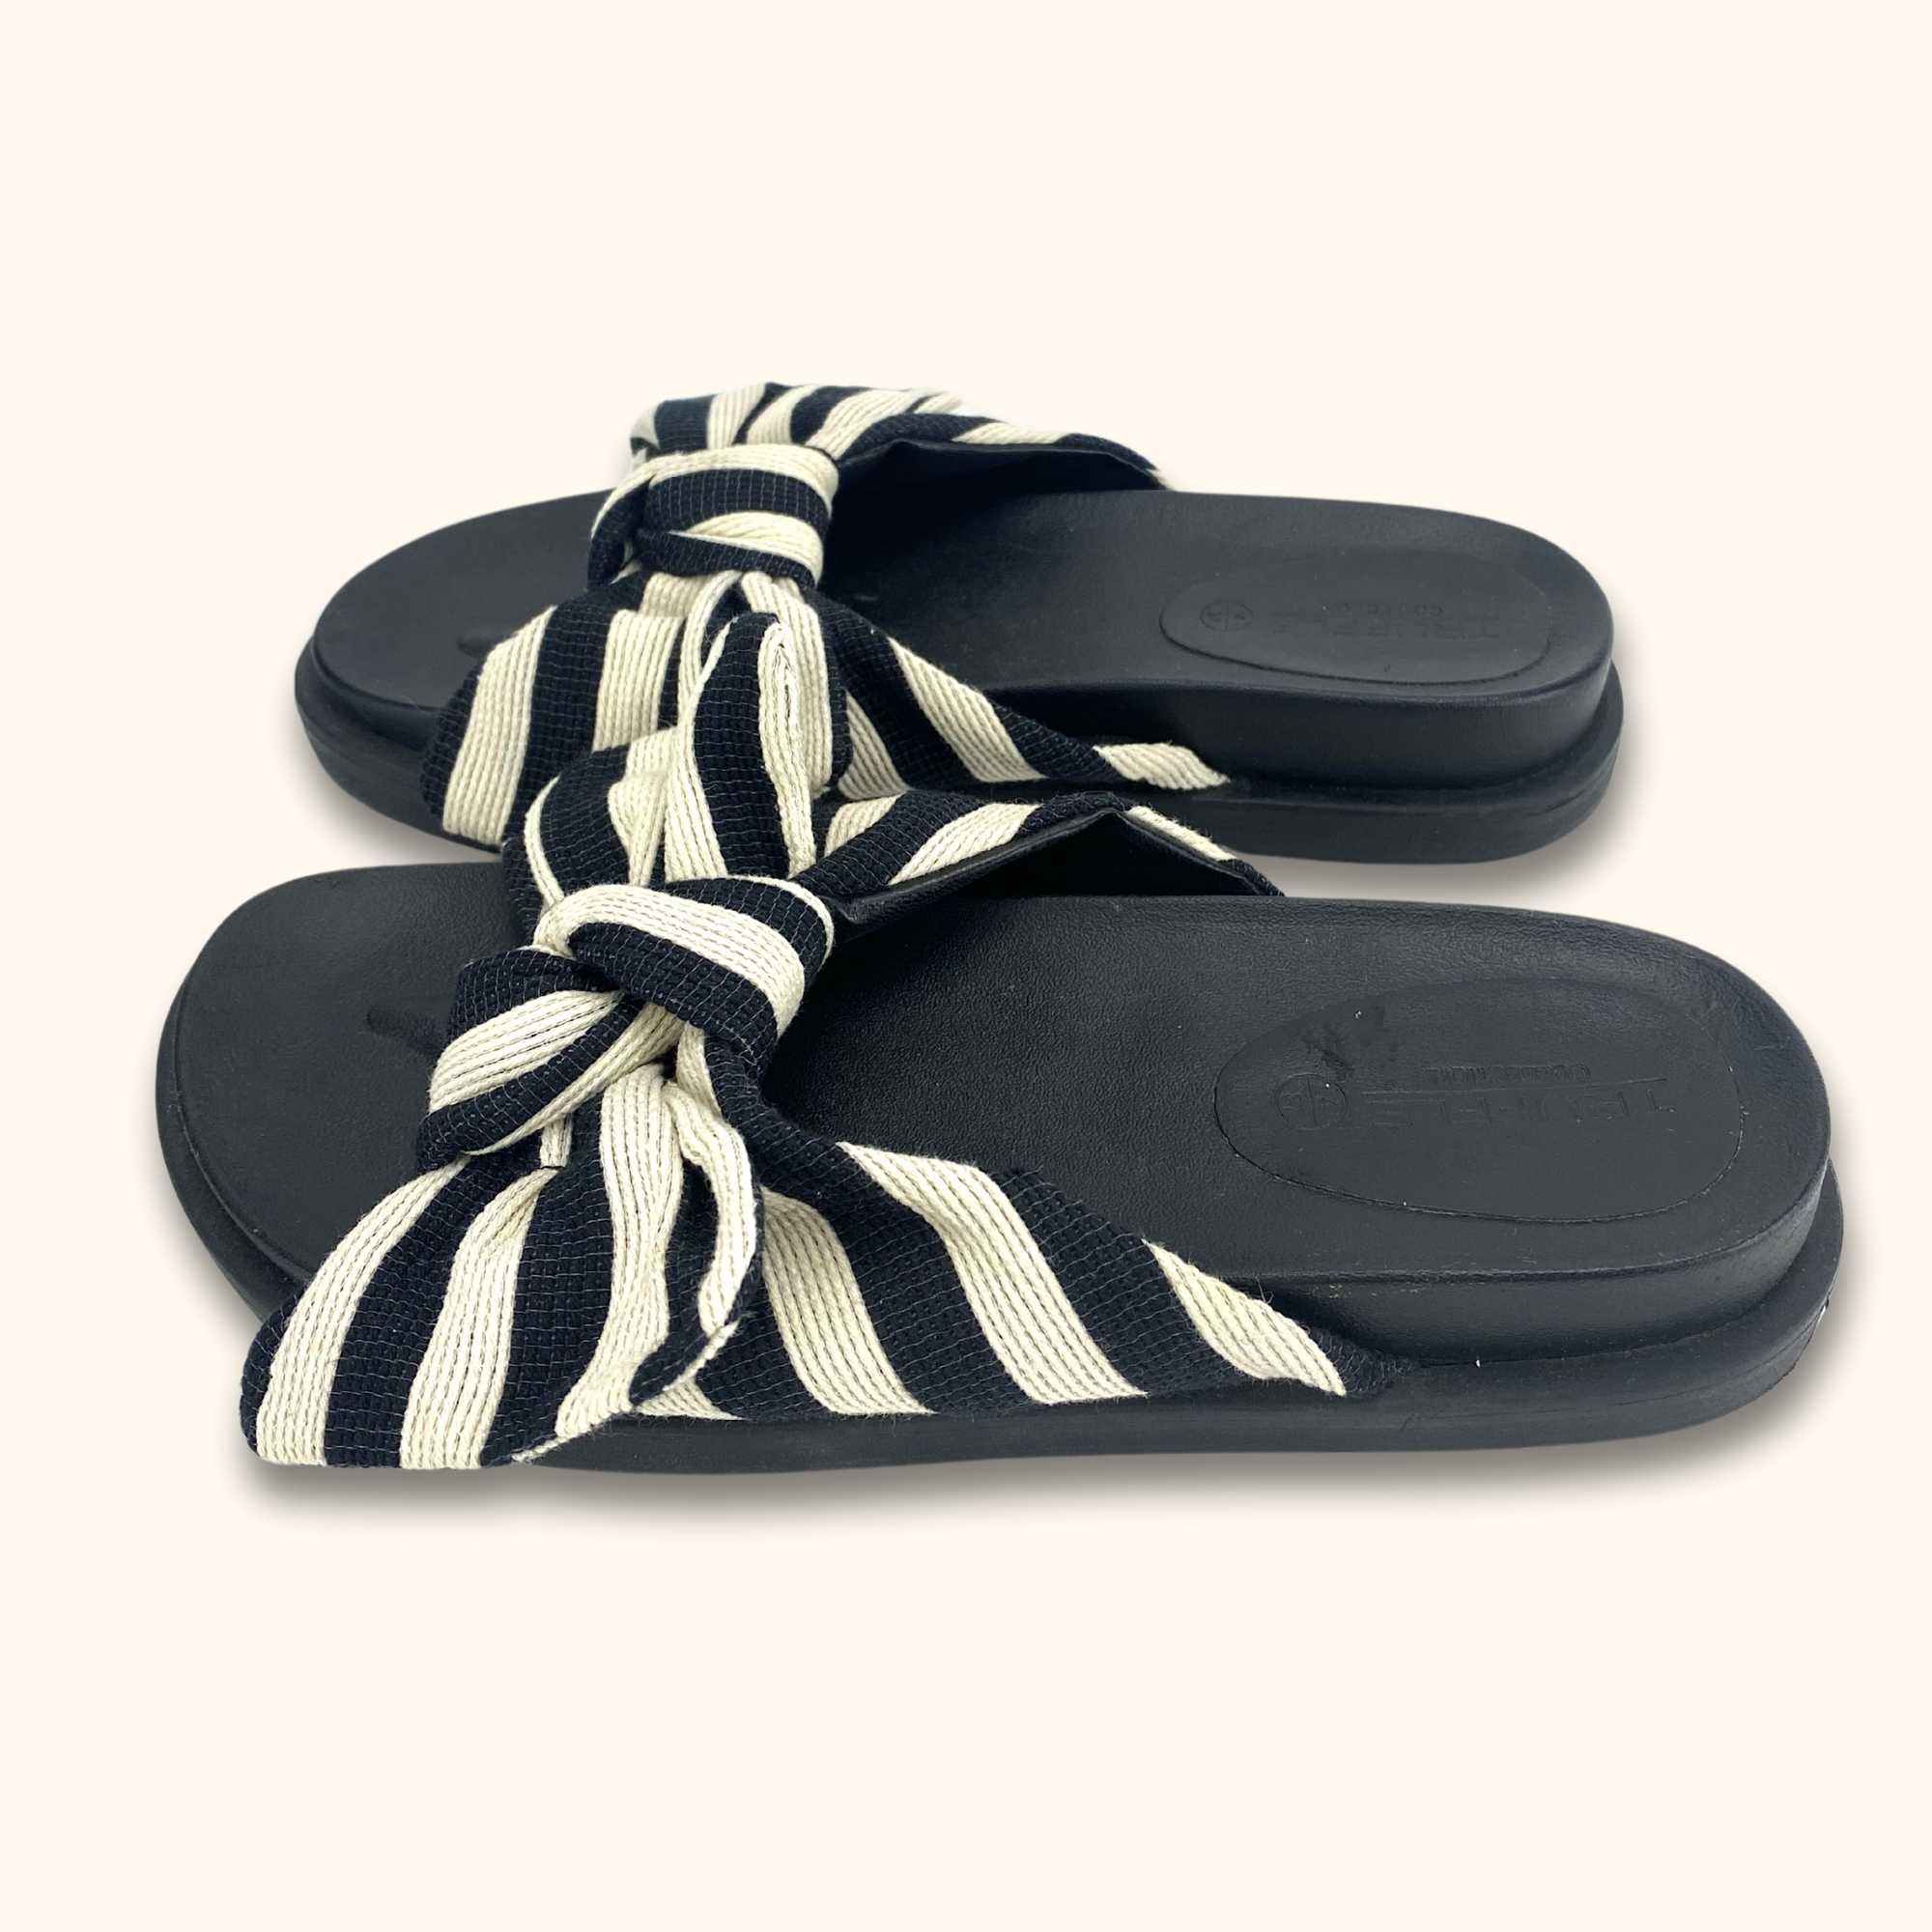 Truffle Collection Black Chunky Sliders with Bow - Size 4 - Truffle collection - Flats